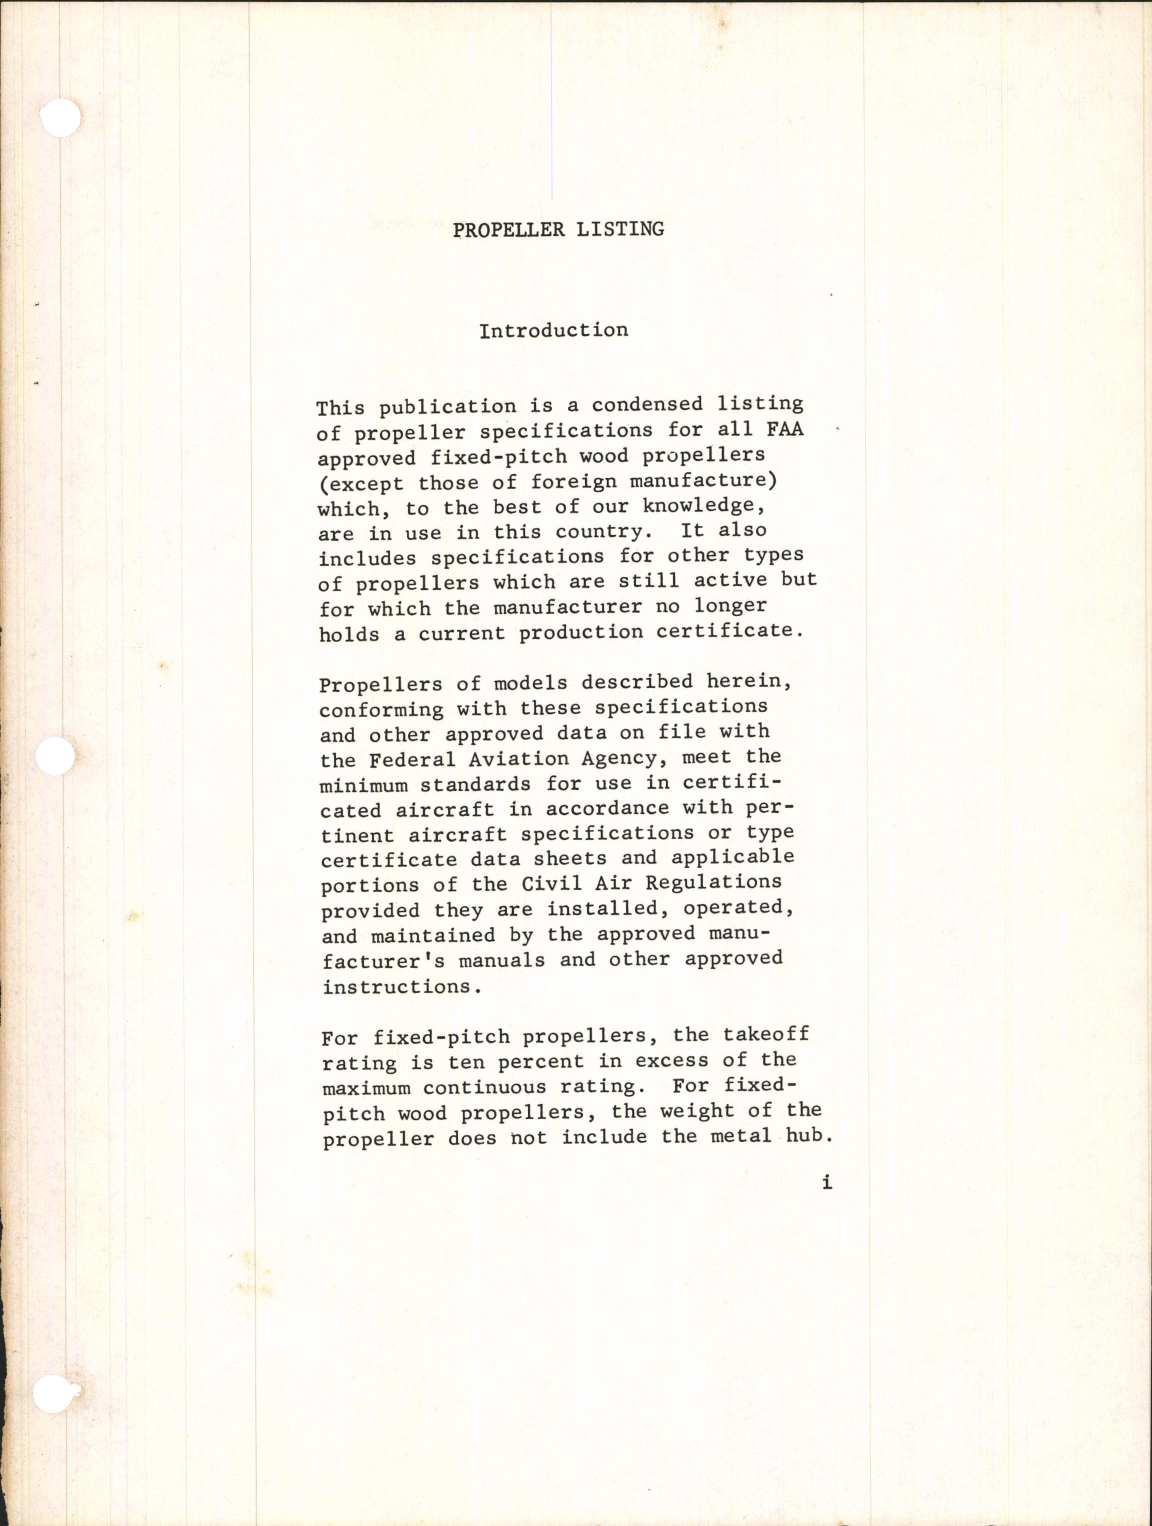 Sample page 4 from AirCorps Library document: Propeller Listing